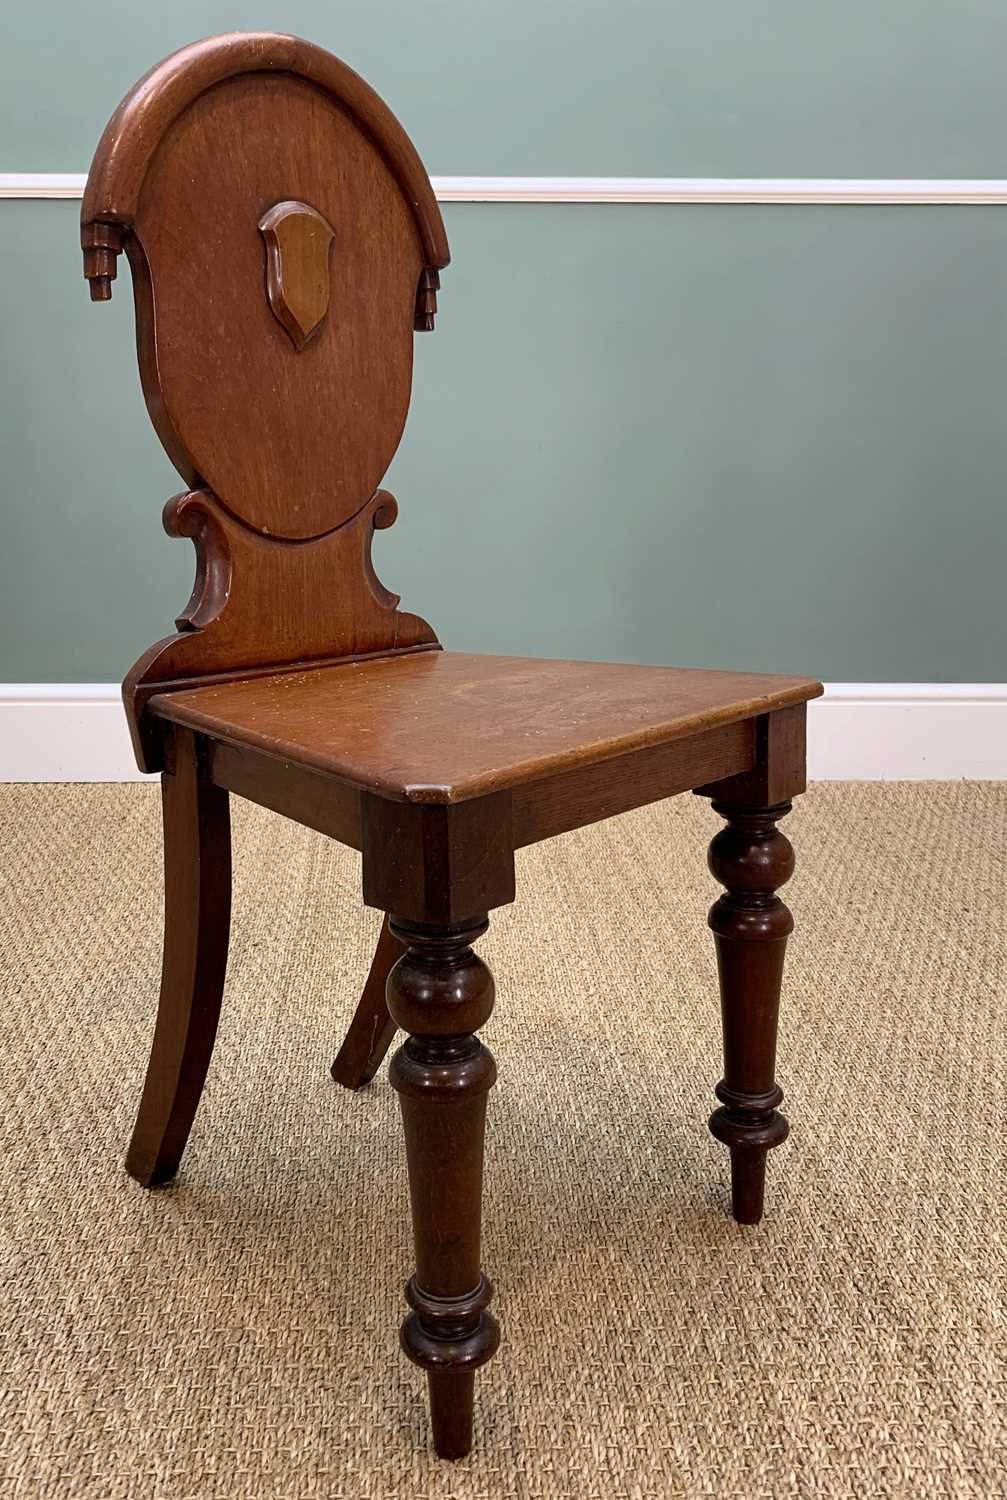 COLLECTION OF ANTIQUE CHAIRS including, mahogany horseshoe chair, oak ladderback, Jacobean style oak - Image 6 of 8